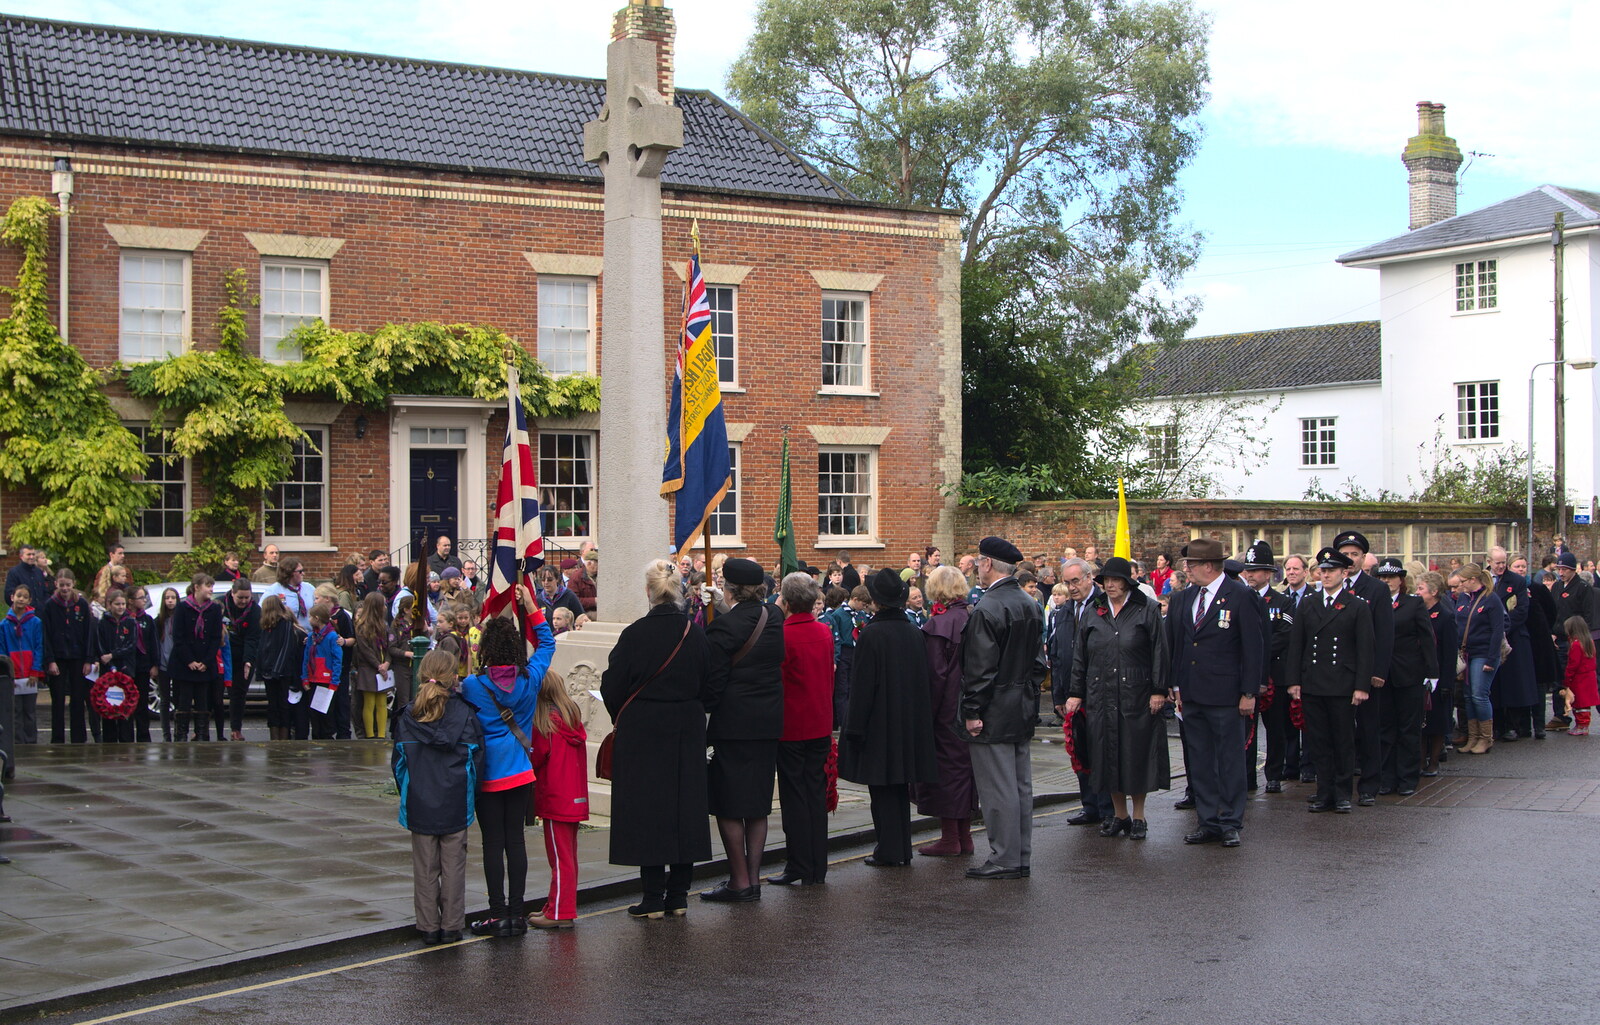 The service at the war memorial from A Remembrance Sunday Parade, Eye, Suffolk - 9th November 2014